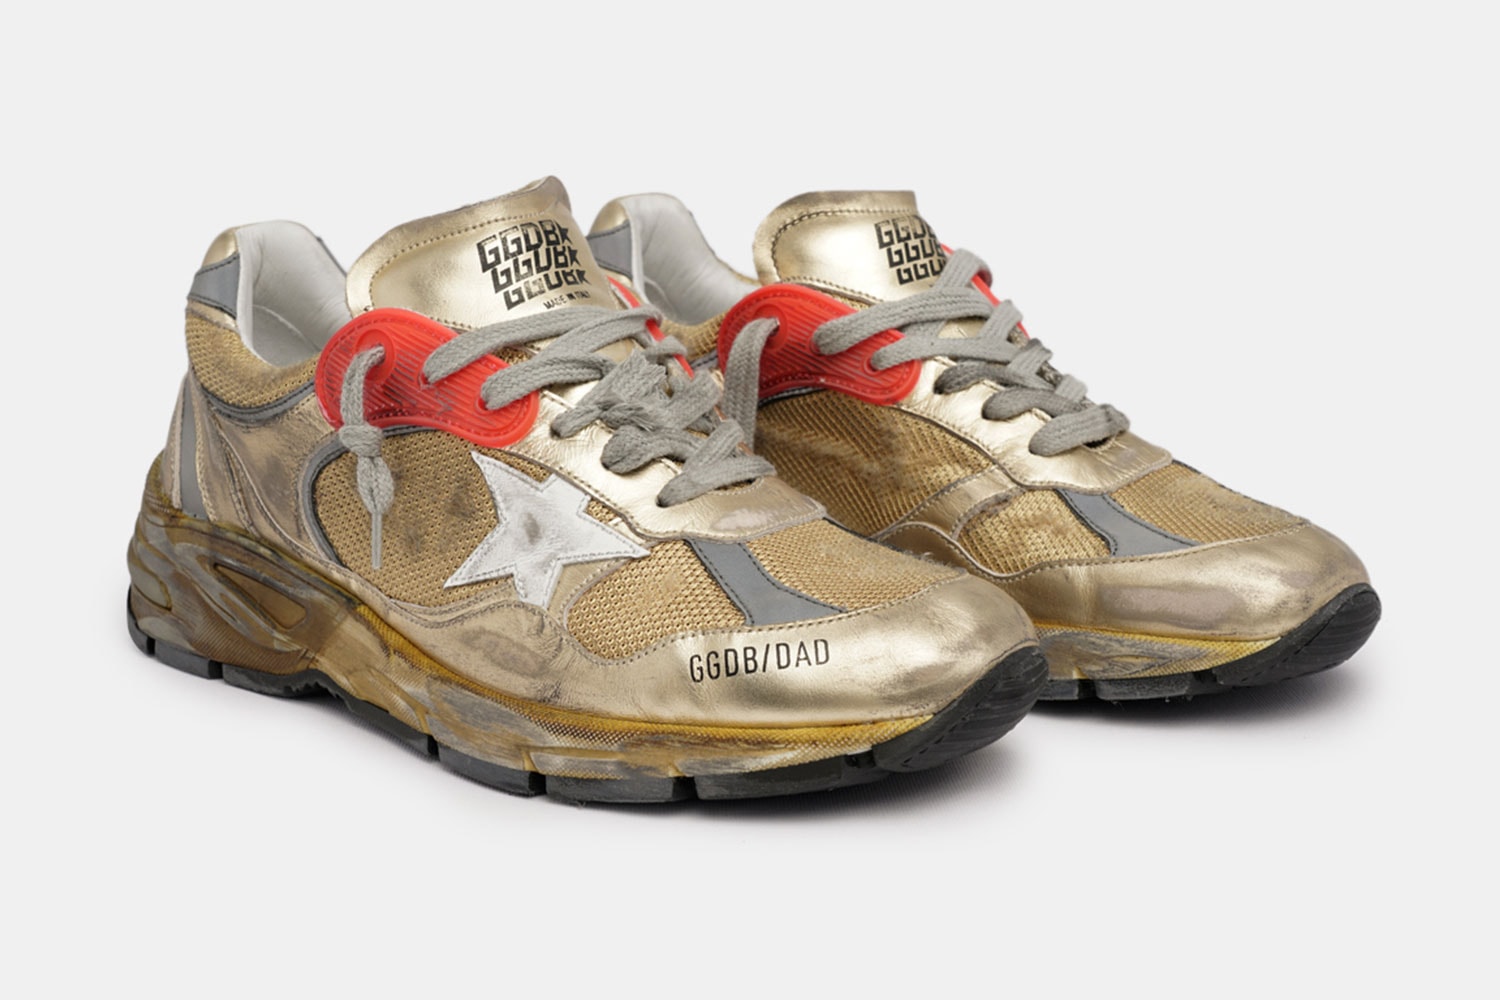 Golden Goose Dad Star Sneaker Blue Silver Red Gold colorways worn out luxury look drops release info